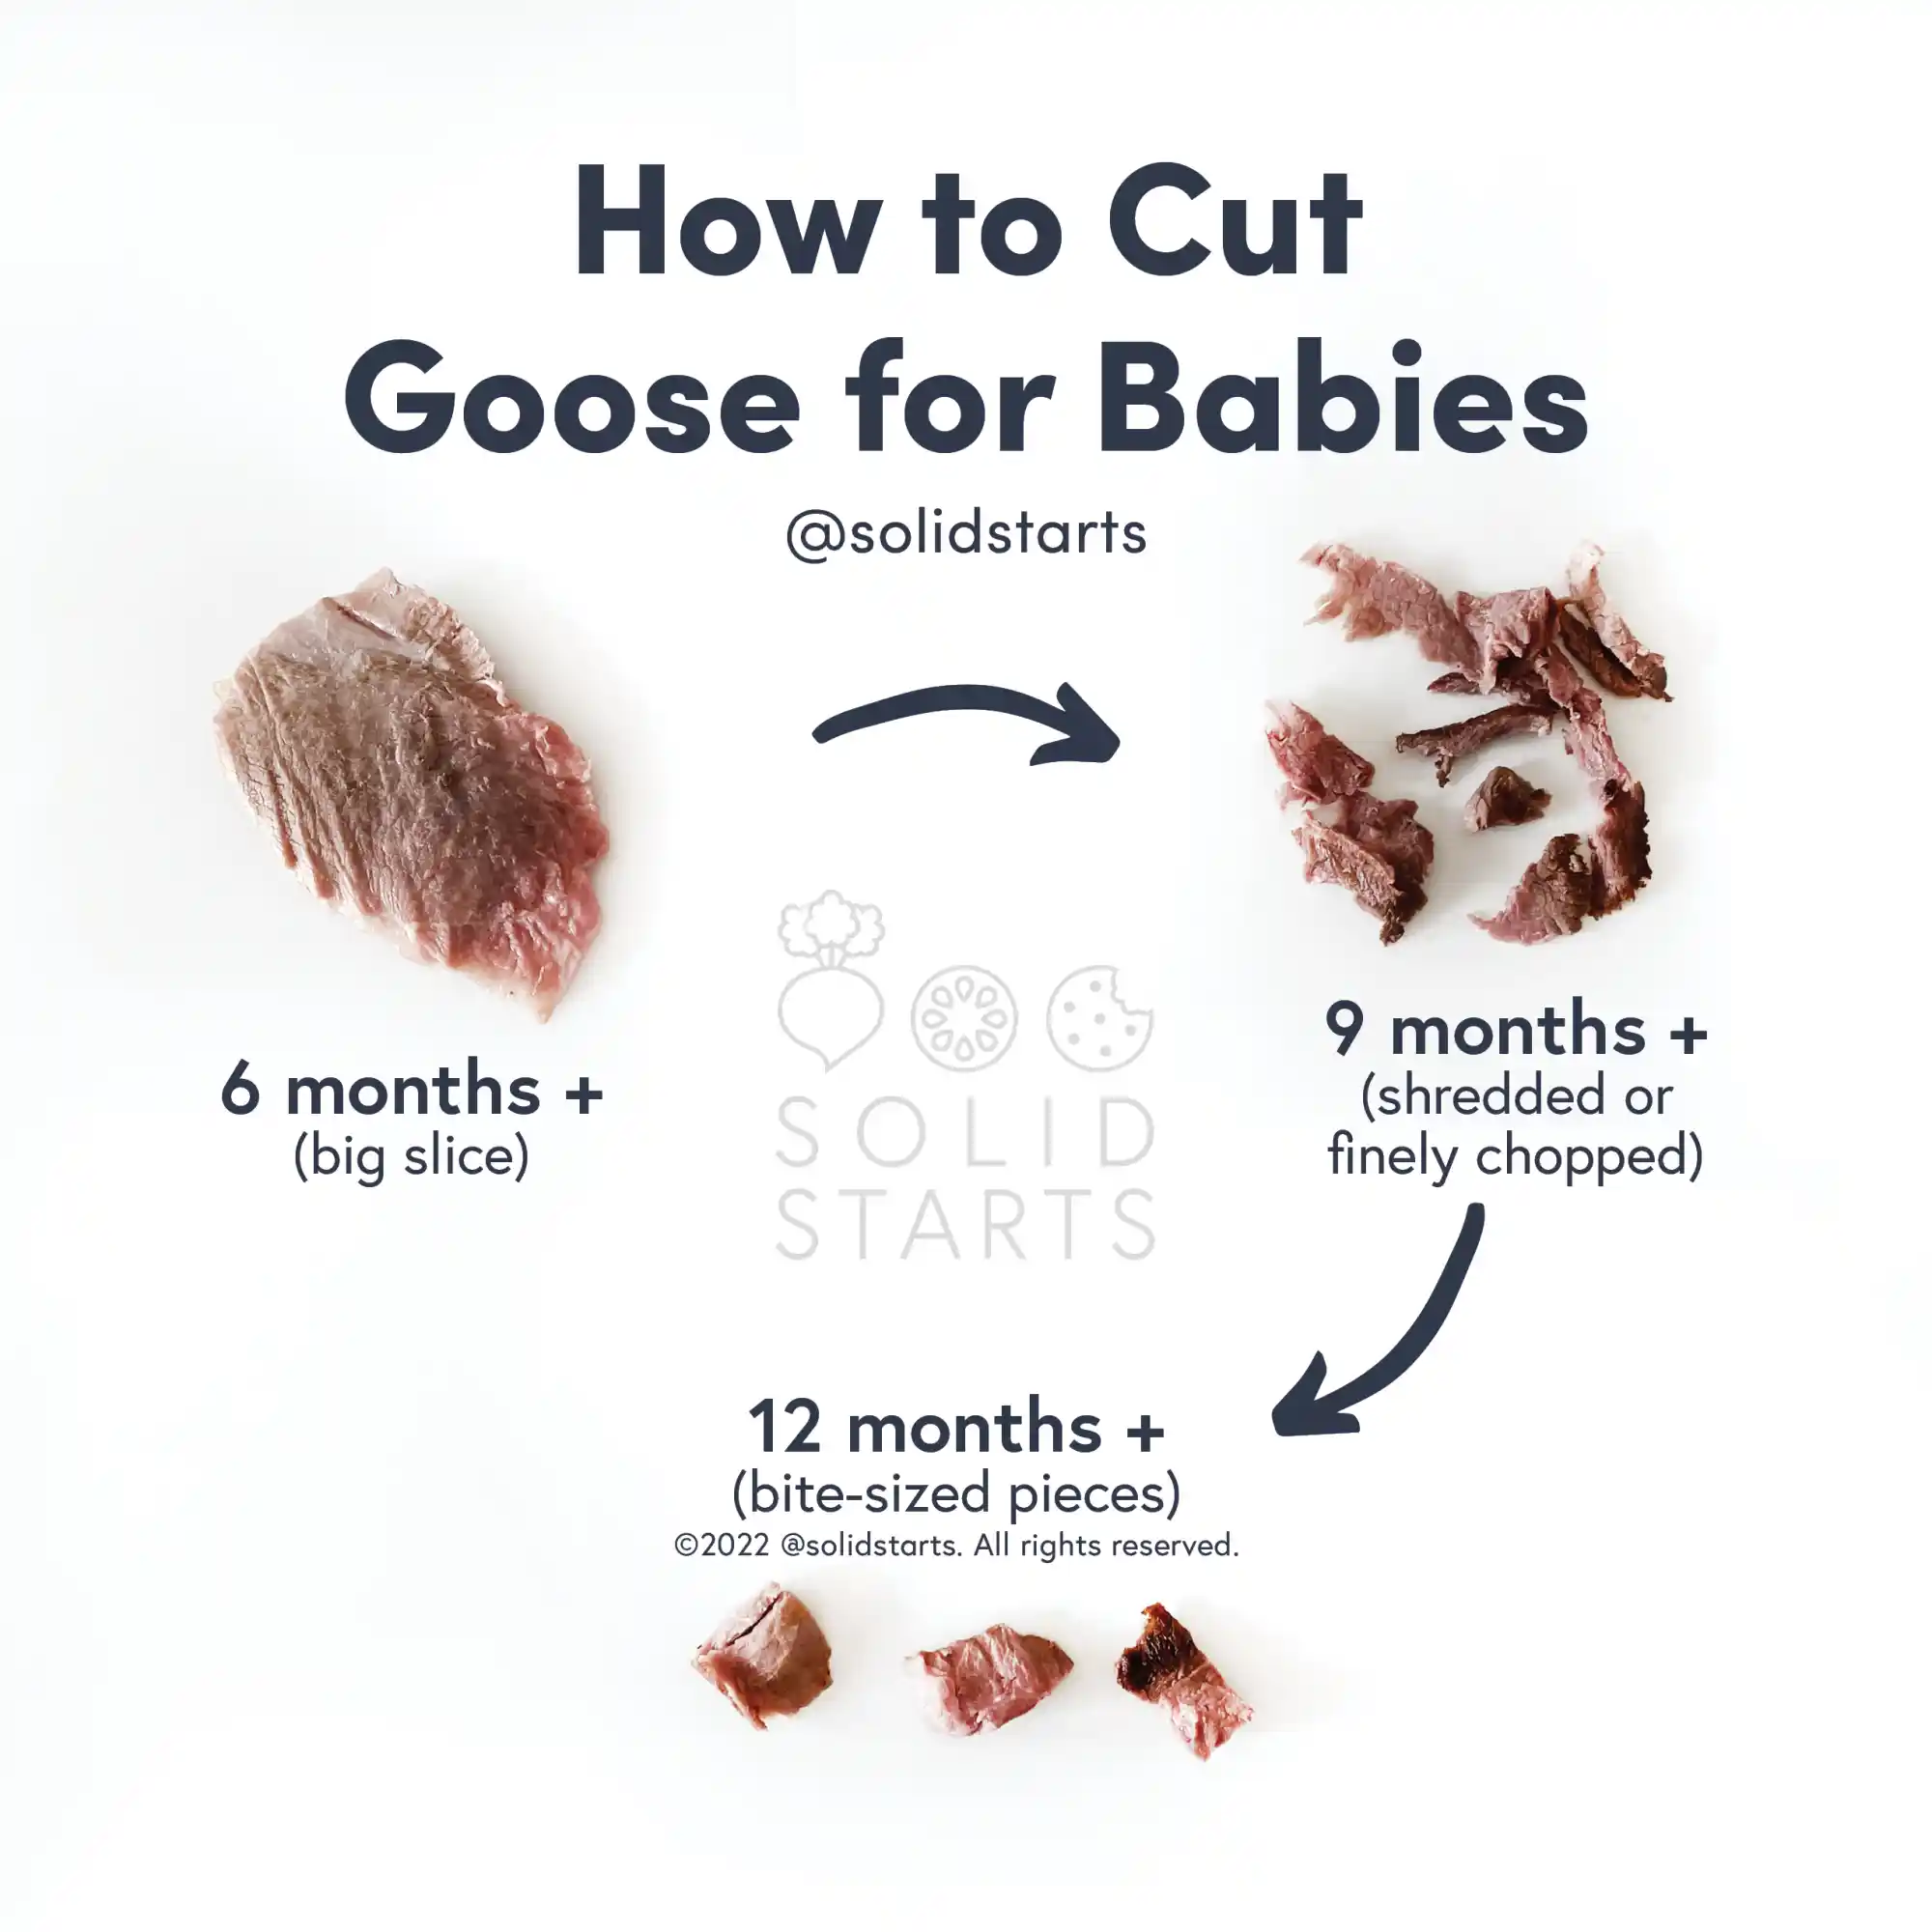 How to Cut Goose for Babies (1)